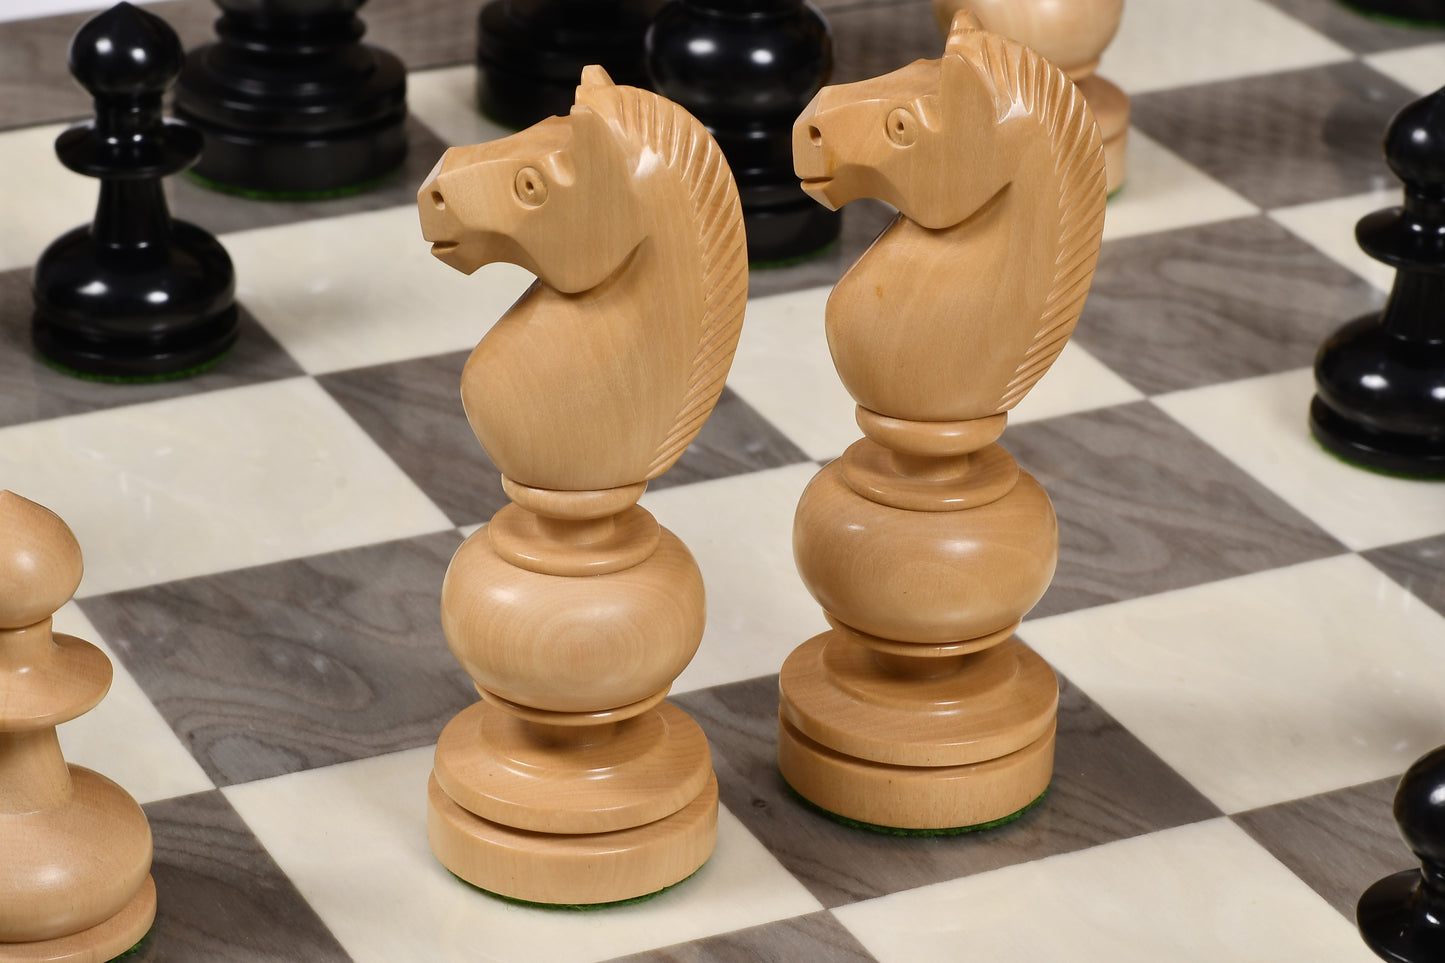 Reproduced Antique Series Regency Chess Pieces in Ebony and Box Wood - 4.3" King